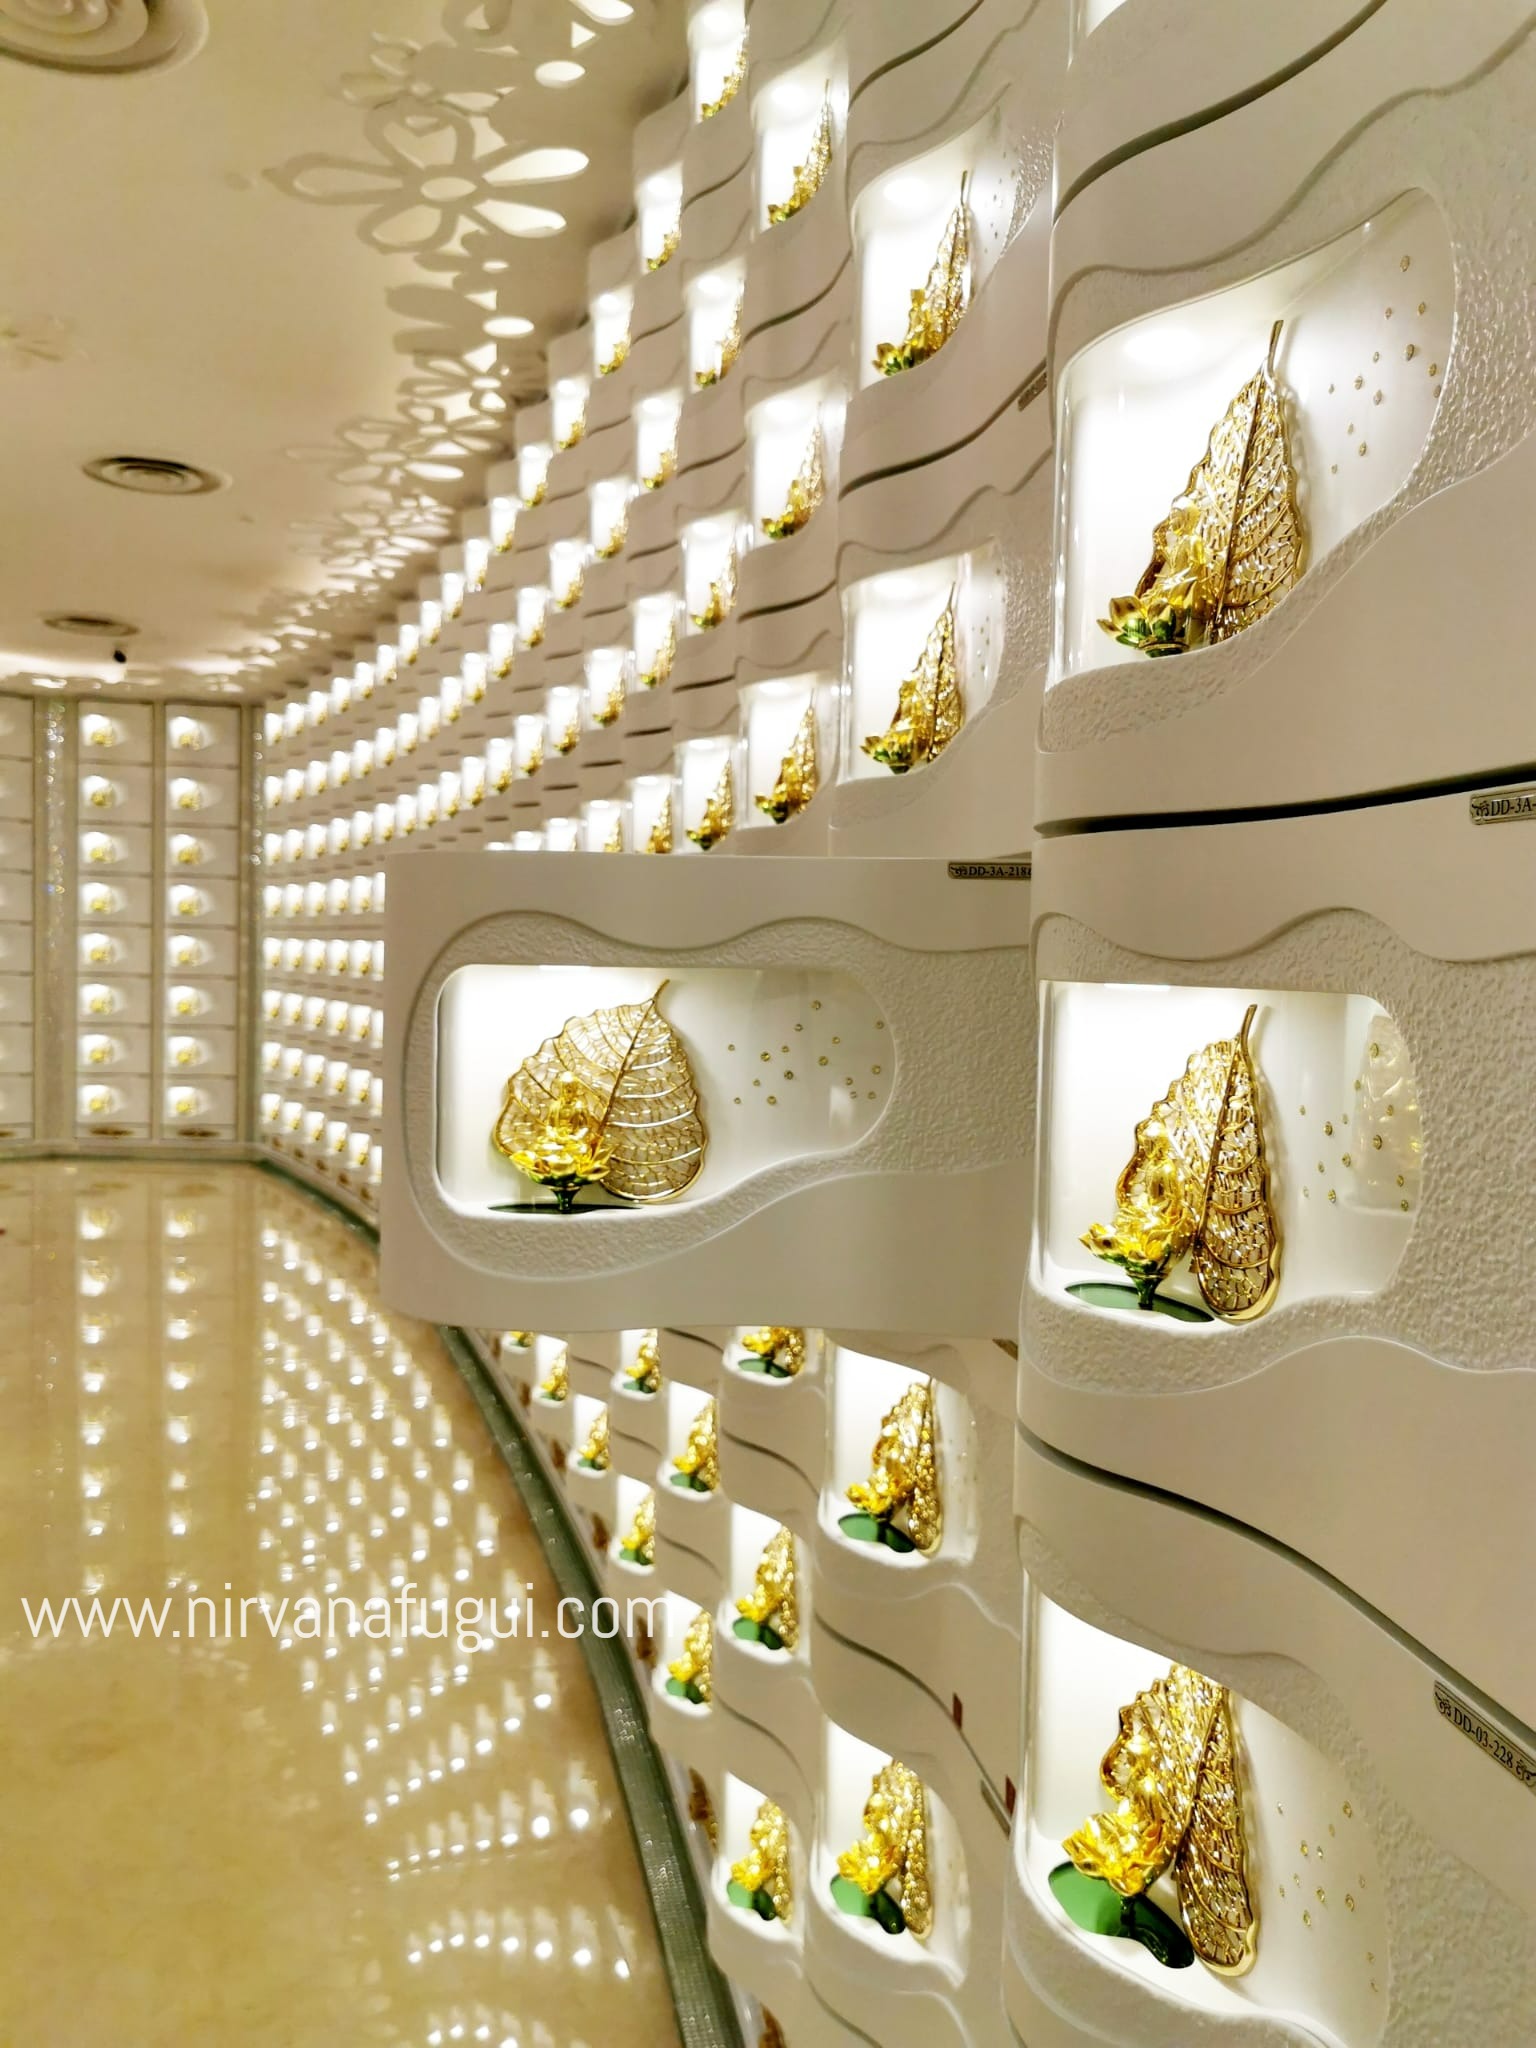 The niche of this columbarium has built-in golden Buddha at the panel.